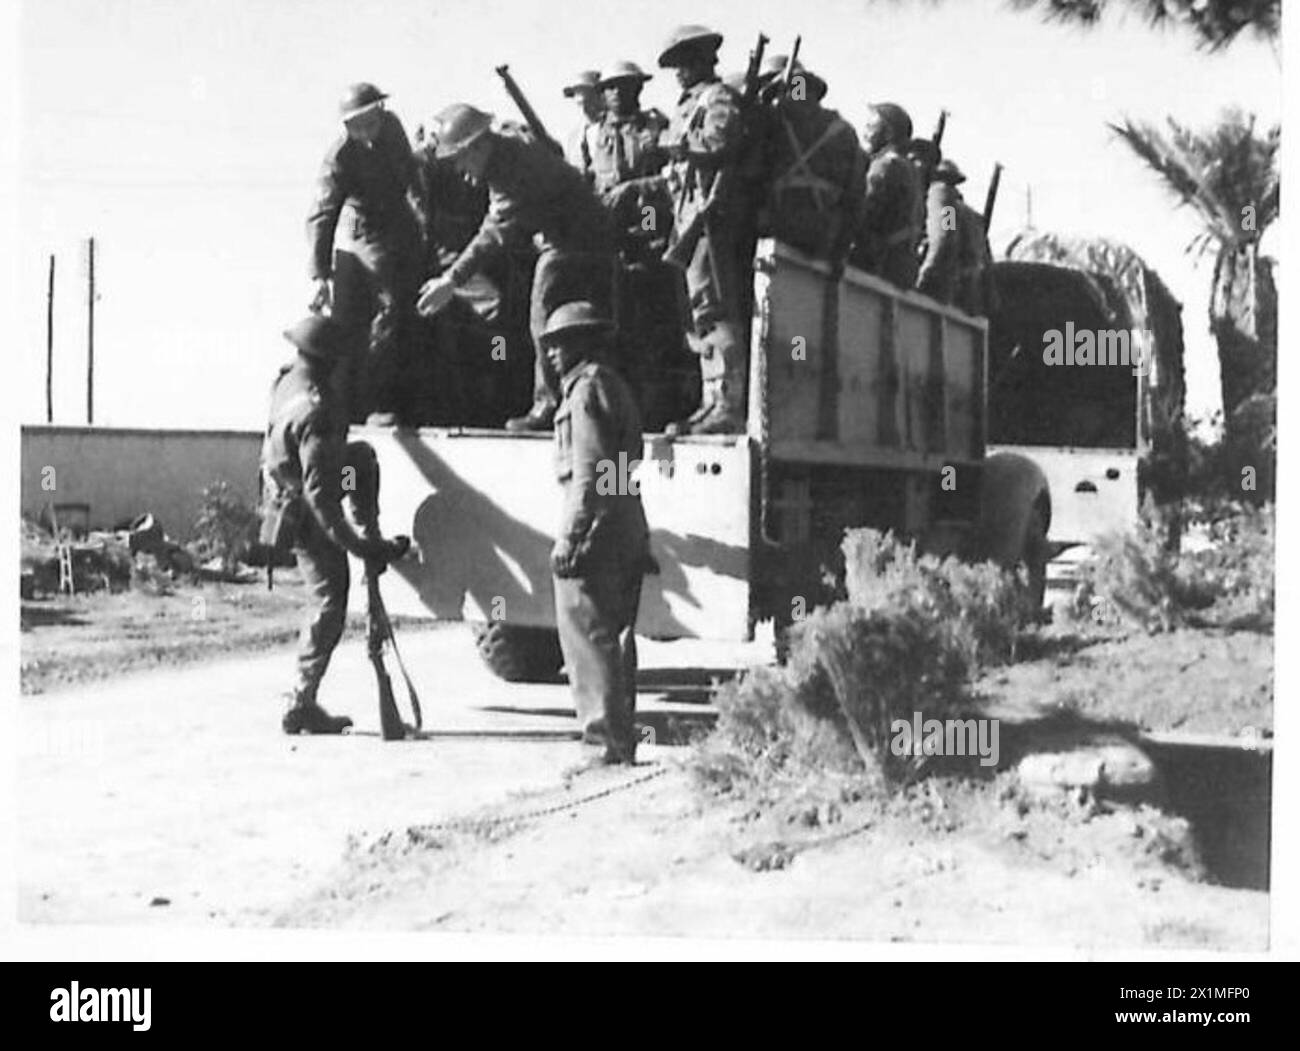 FIFTH ARMY : ANZIO BRIDGEHEAD.SOUTH AFRICAN COLOURED TROOPS AT ANZIO - Swazi Smoke men climb onto transport for the docks, British Army Stock Photo